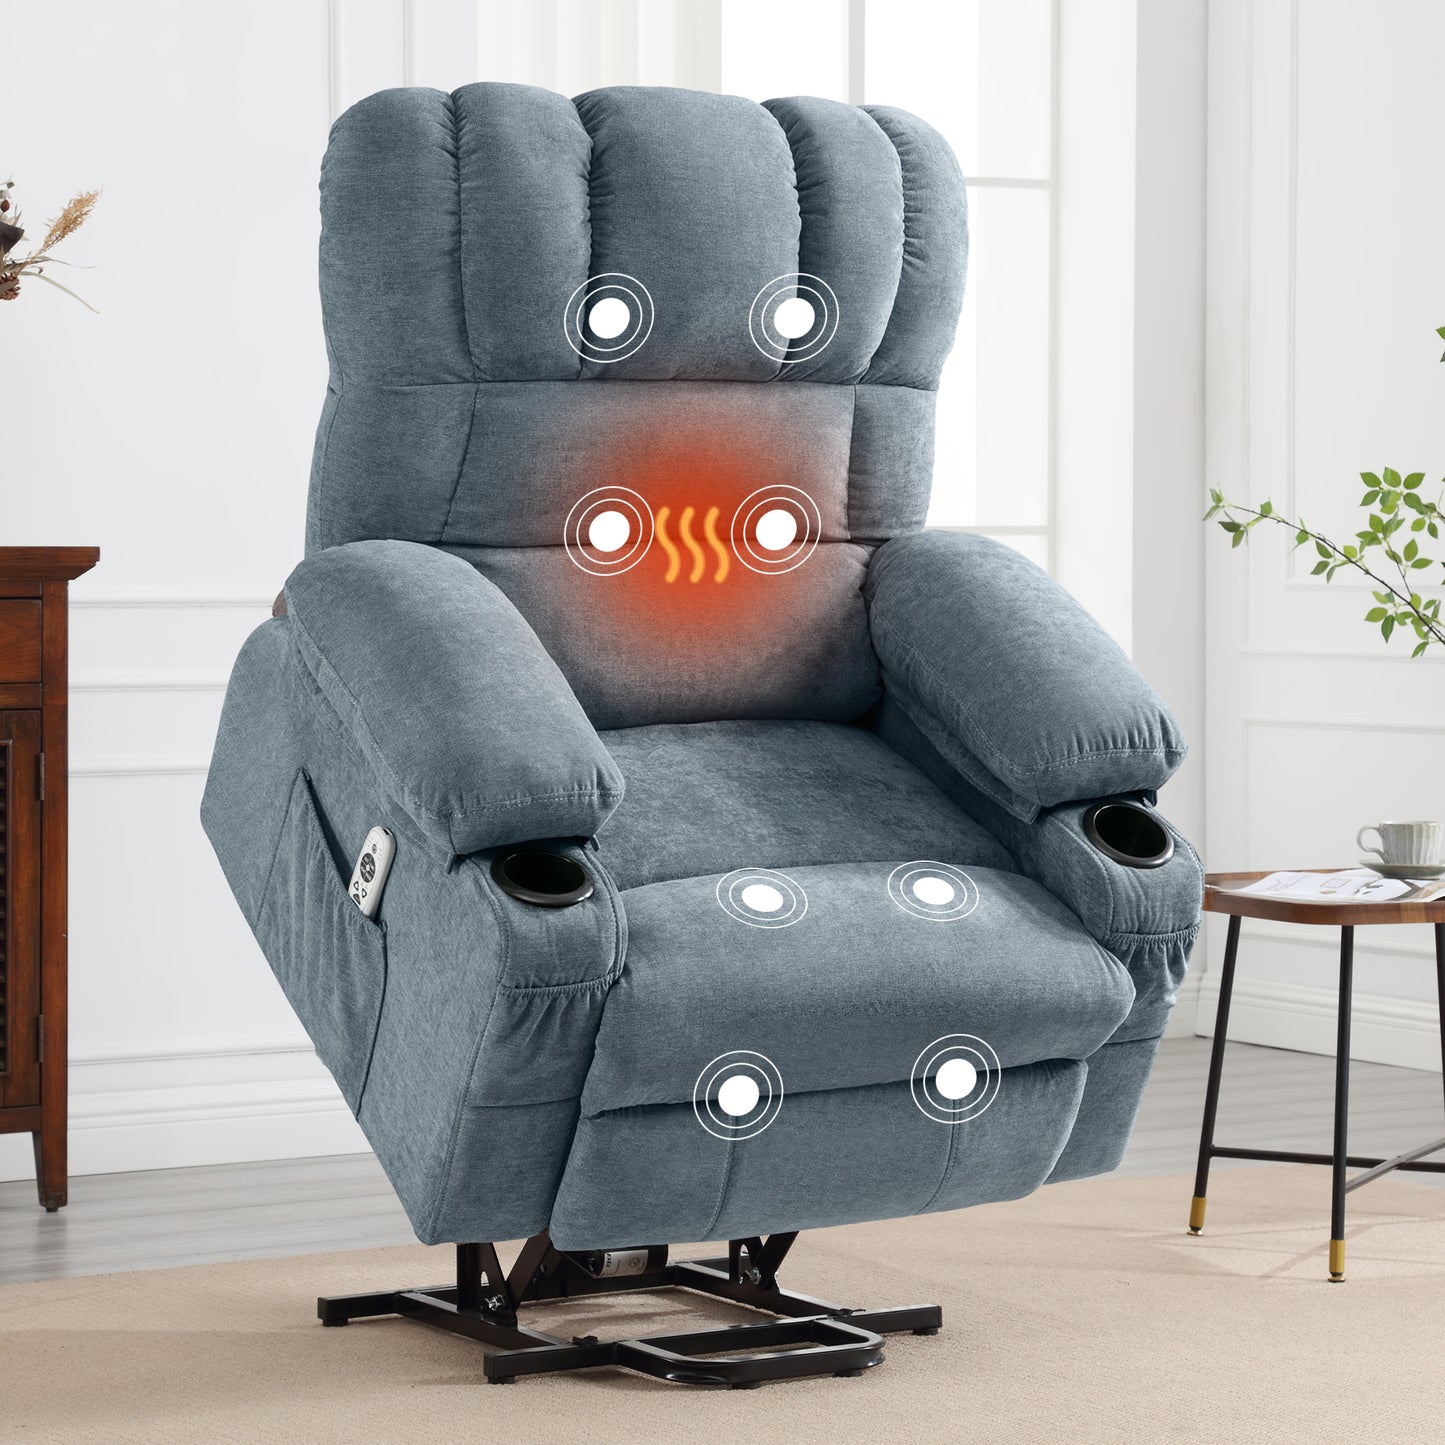 HSUNNS Power Lift Recliner Chair with Heat and Vibration Massage, Fabric Elderly Oversized Reclining Sofa with Cup Holders and Side, USB Charge Port for living Home Theater, Blue